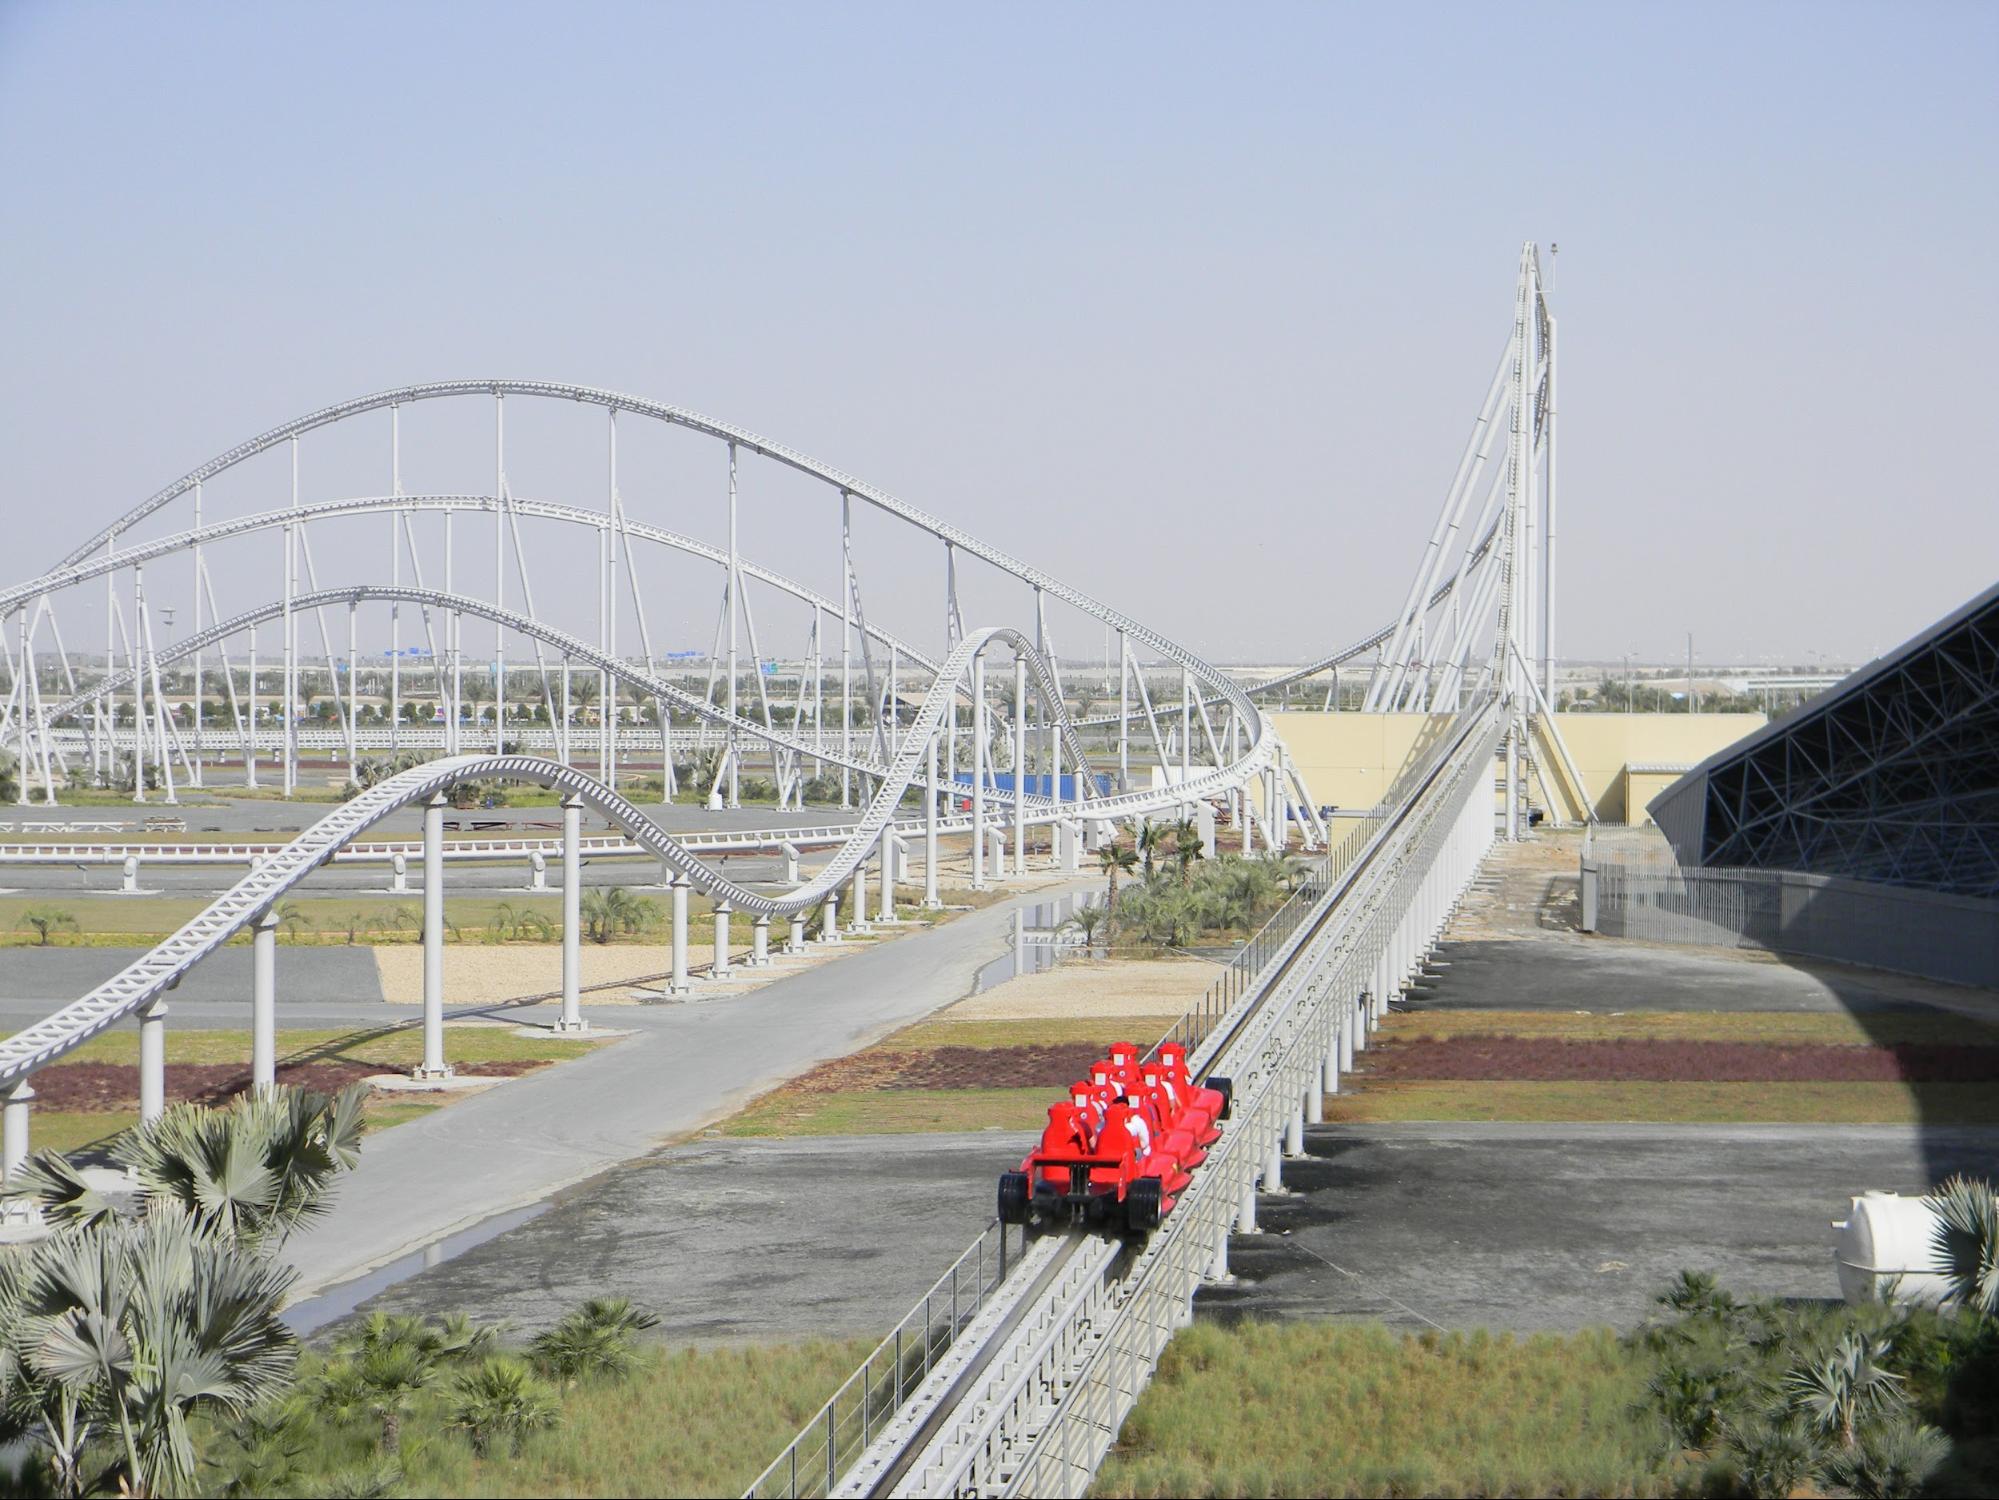 The Fastest Roller Coaster in the World goes from 0 to 150 MPH in 5 Seconds